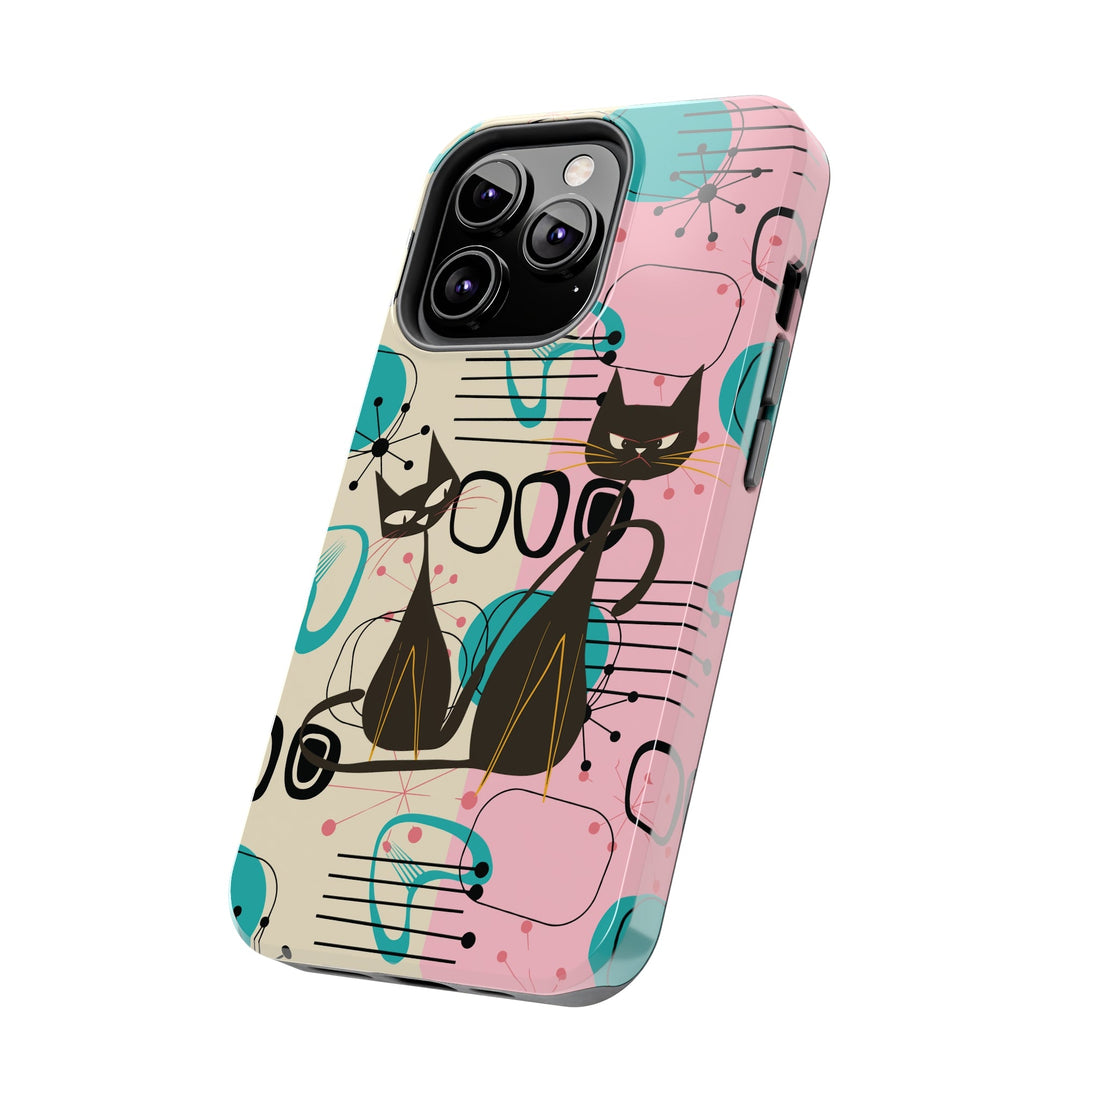 Kate McEnroe New York Mid Century Modern Atomic Cat iPhone Case in Retro Geometric Pink Turquoise and BlackPhone Cases24520396567818338653